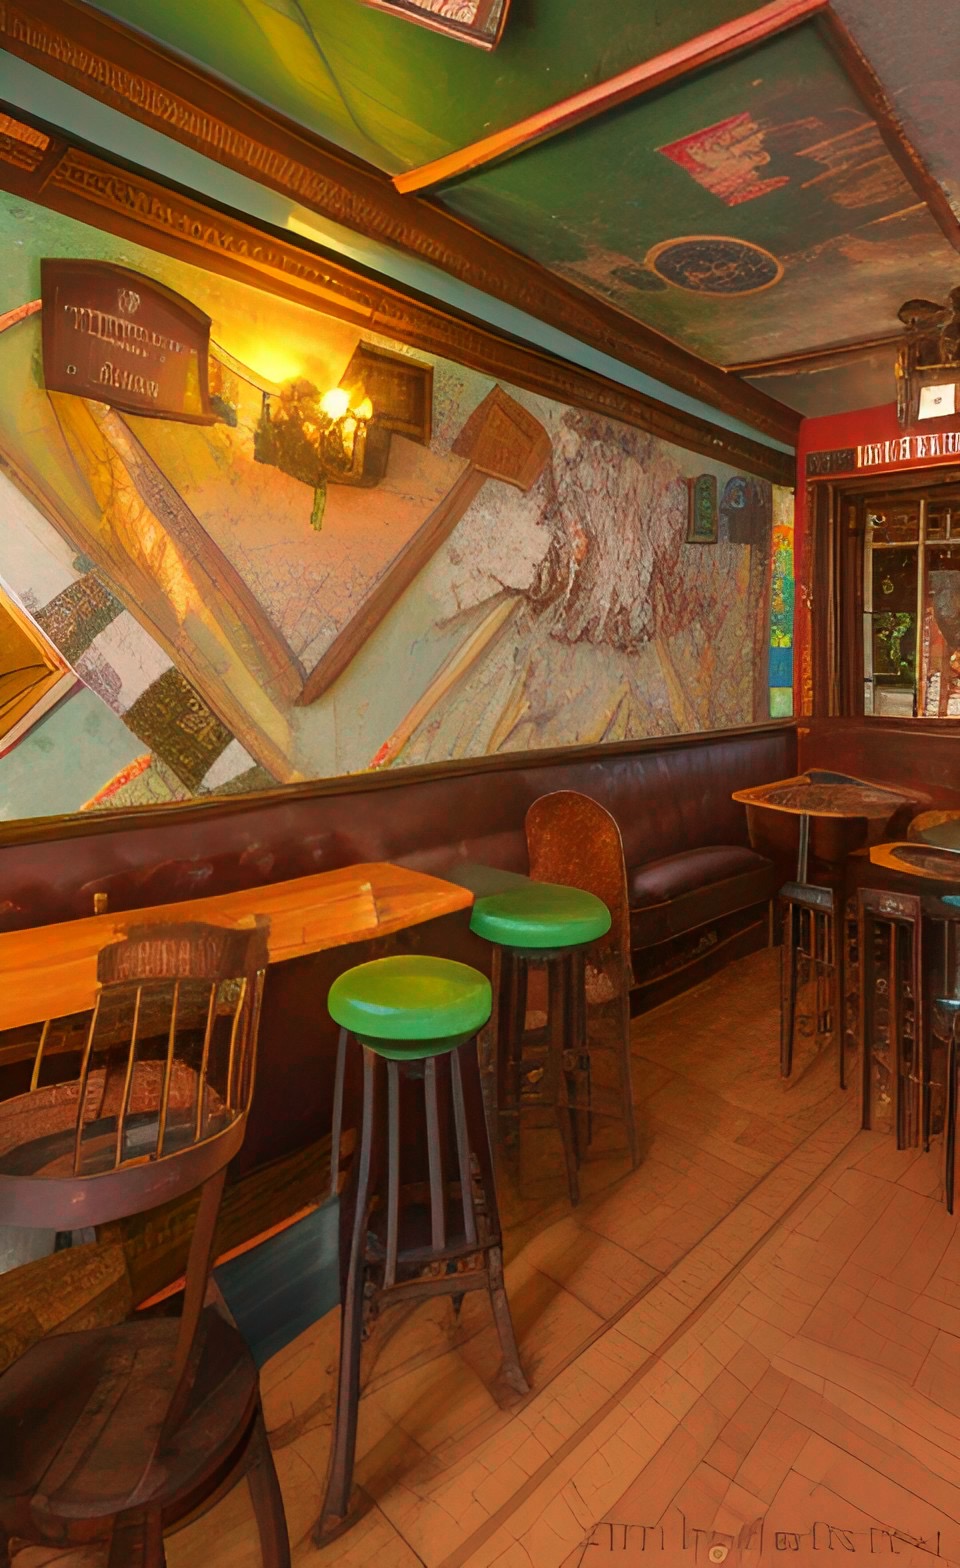 A pub with mismatched stools and scattered wallpaper